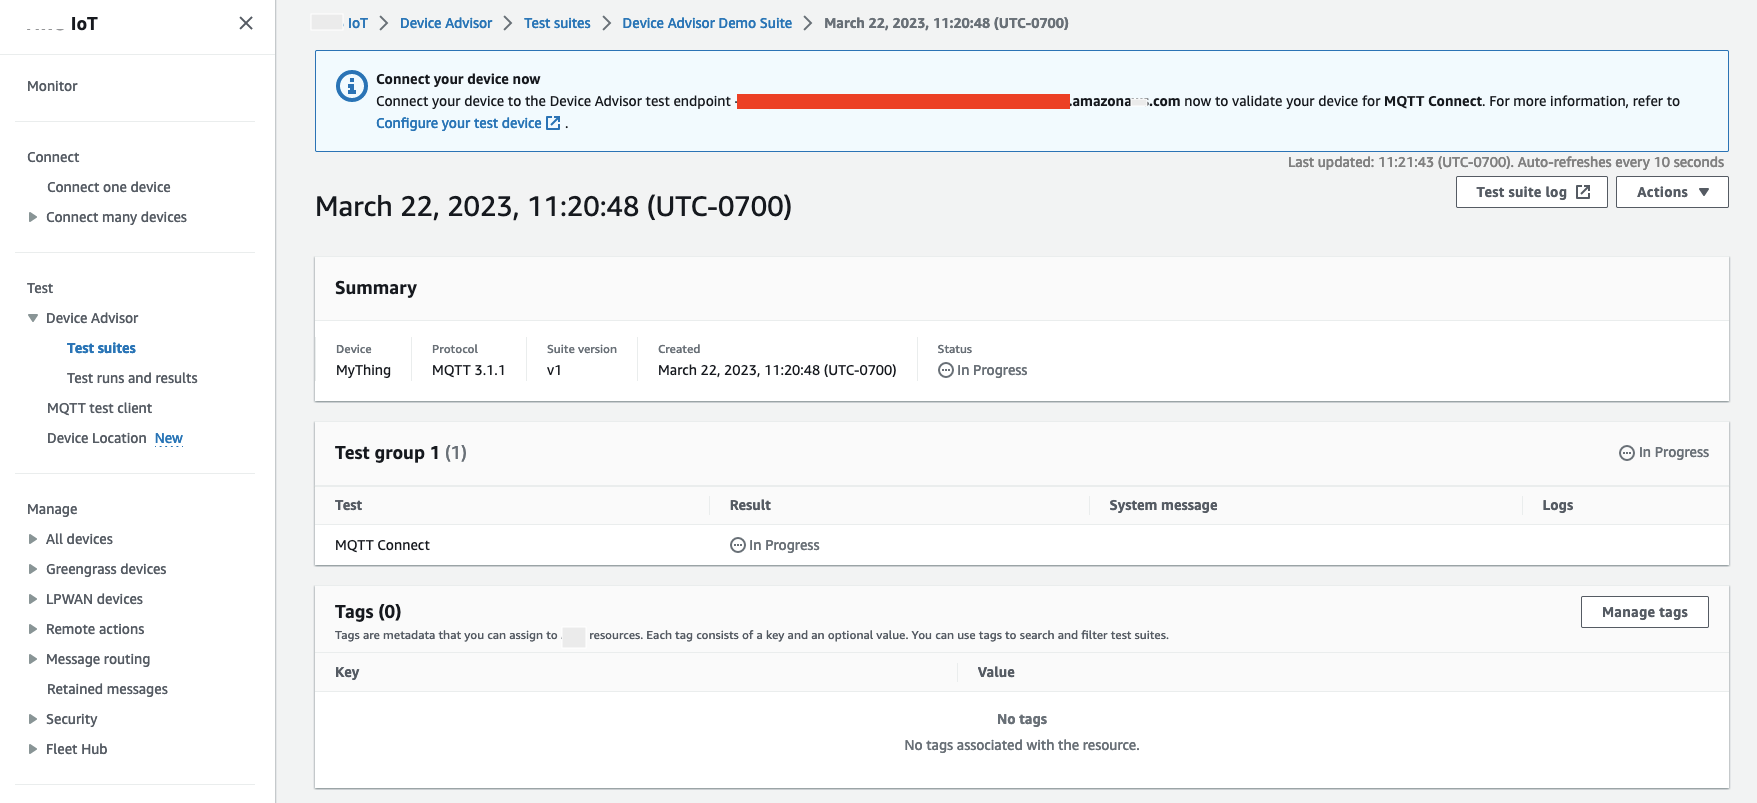 
                        The test suite interface that indicates an MQTT 3.1.1 test is in progress for the device "MyThing".
                    